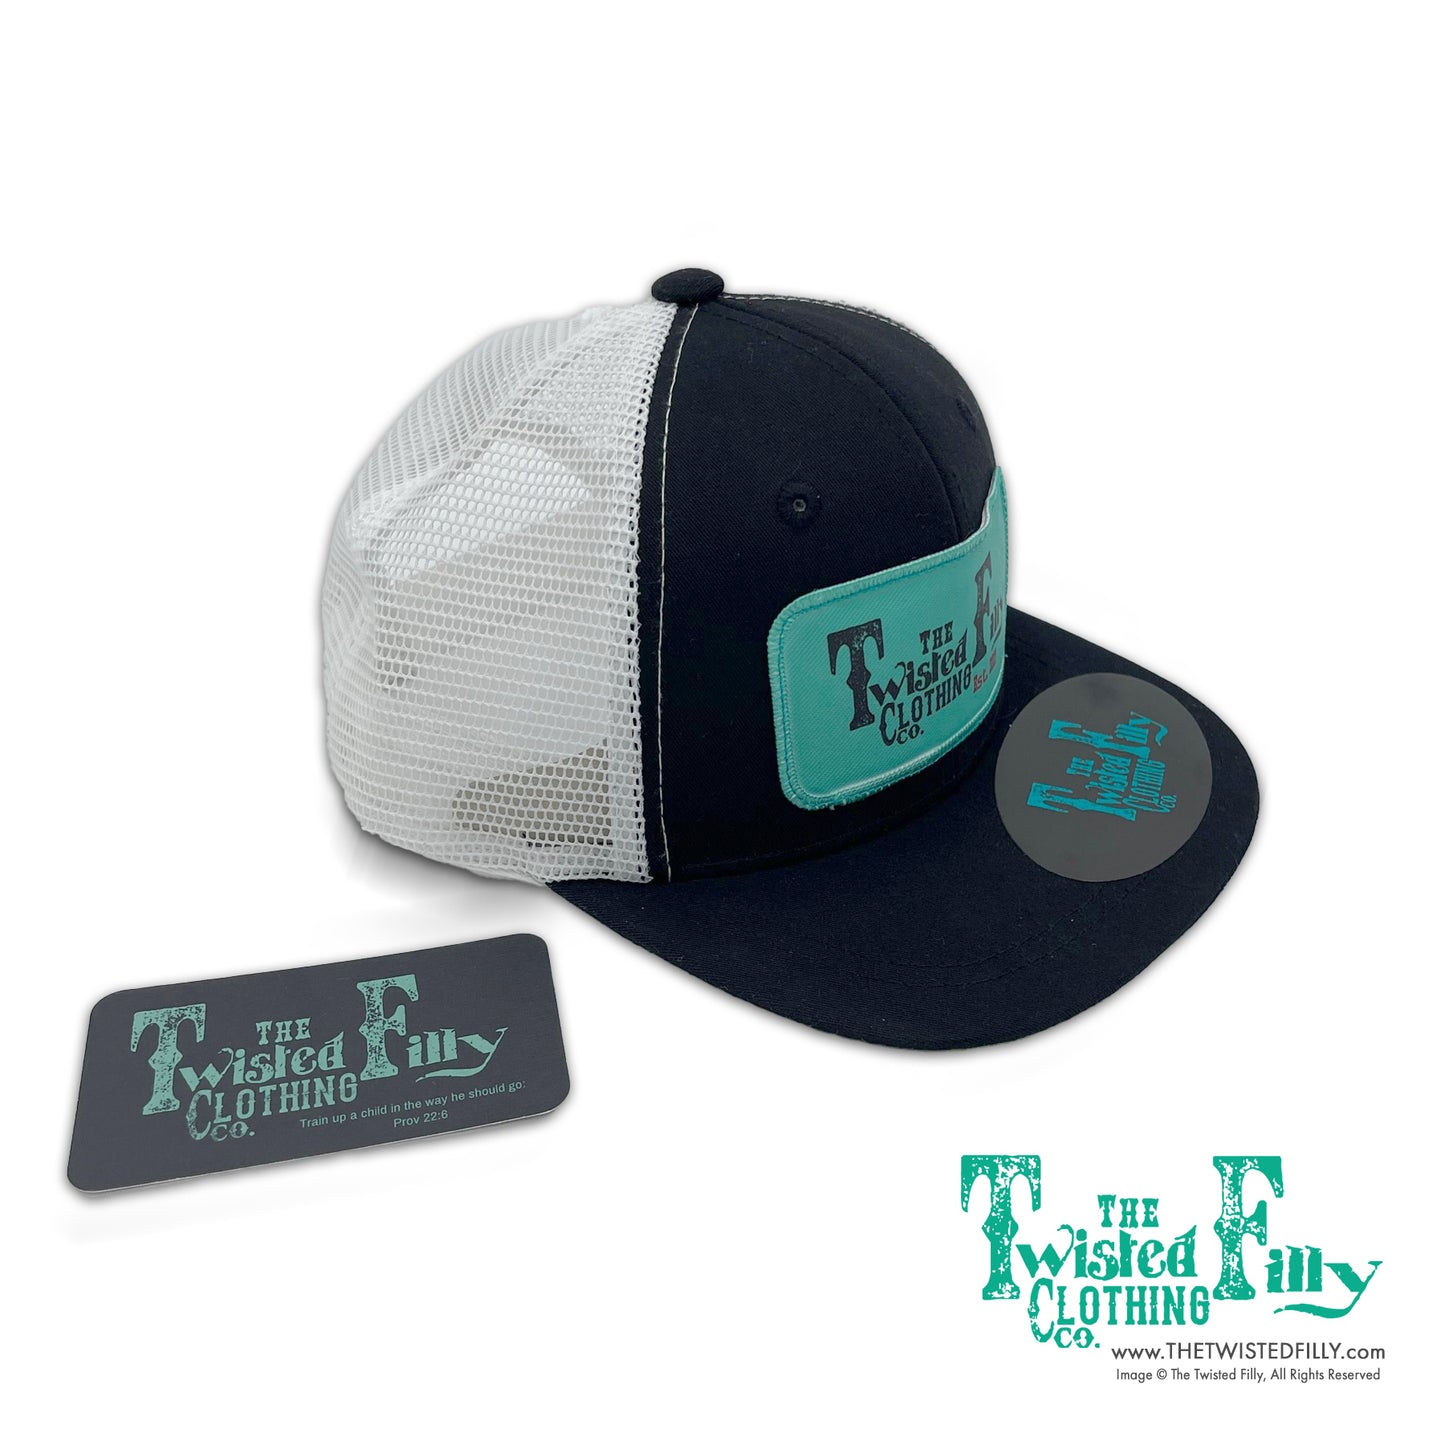 The Twisted Filly - Youth / Adult Trucker Hat - Black/White